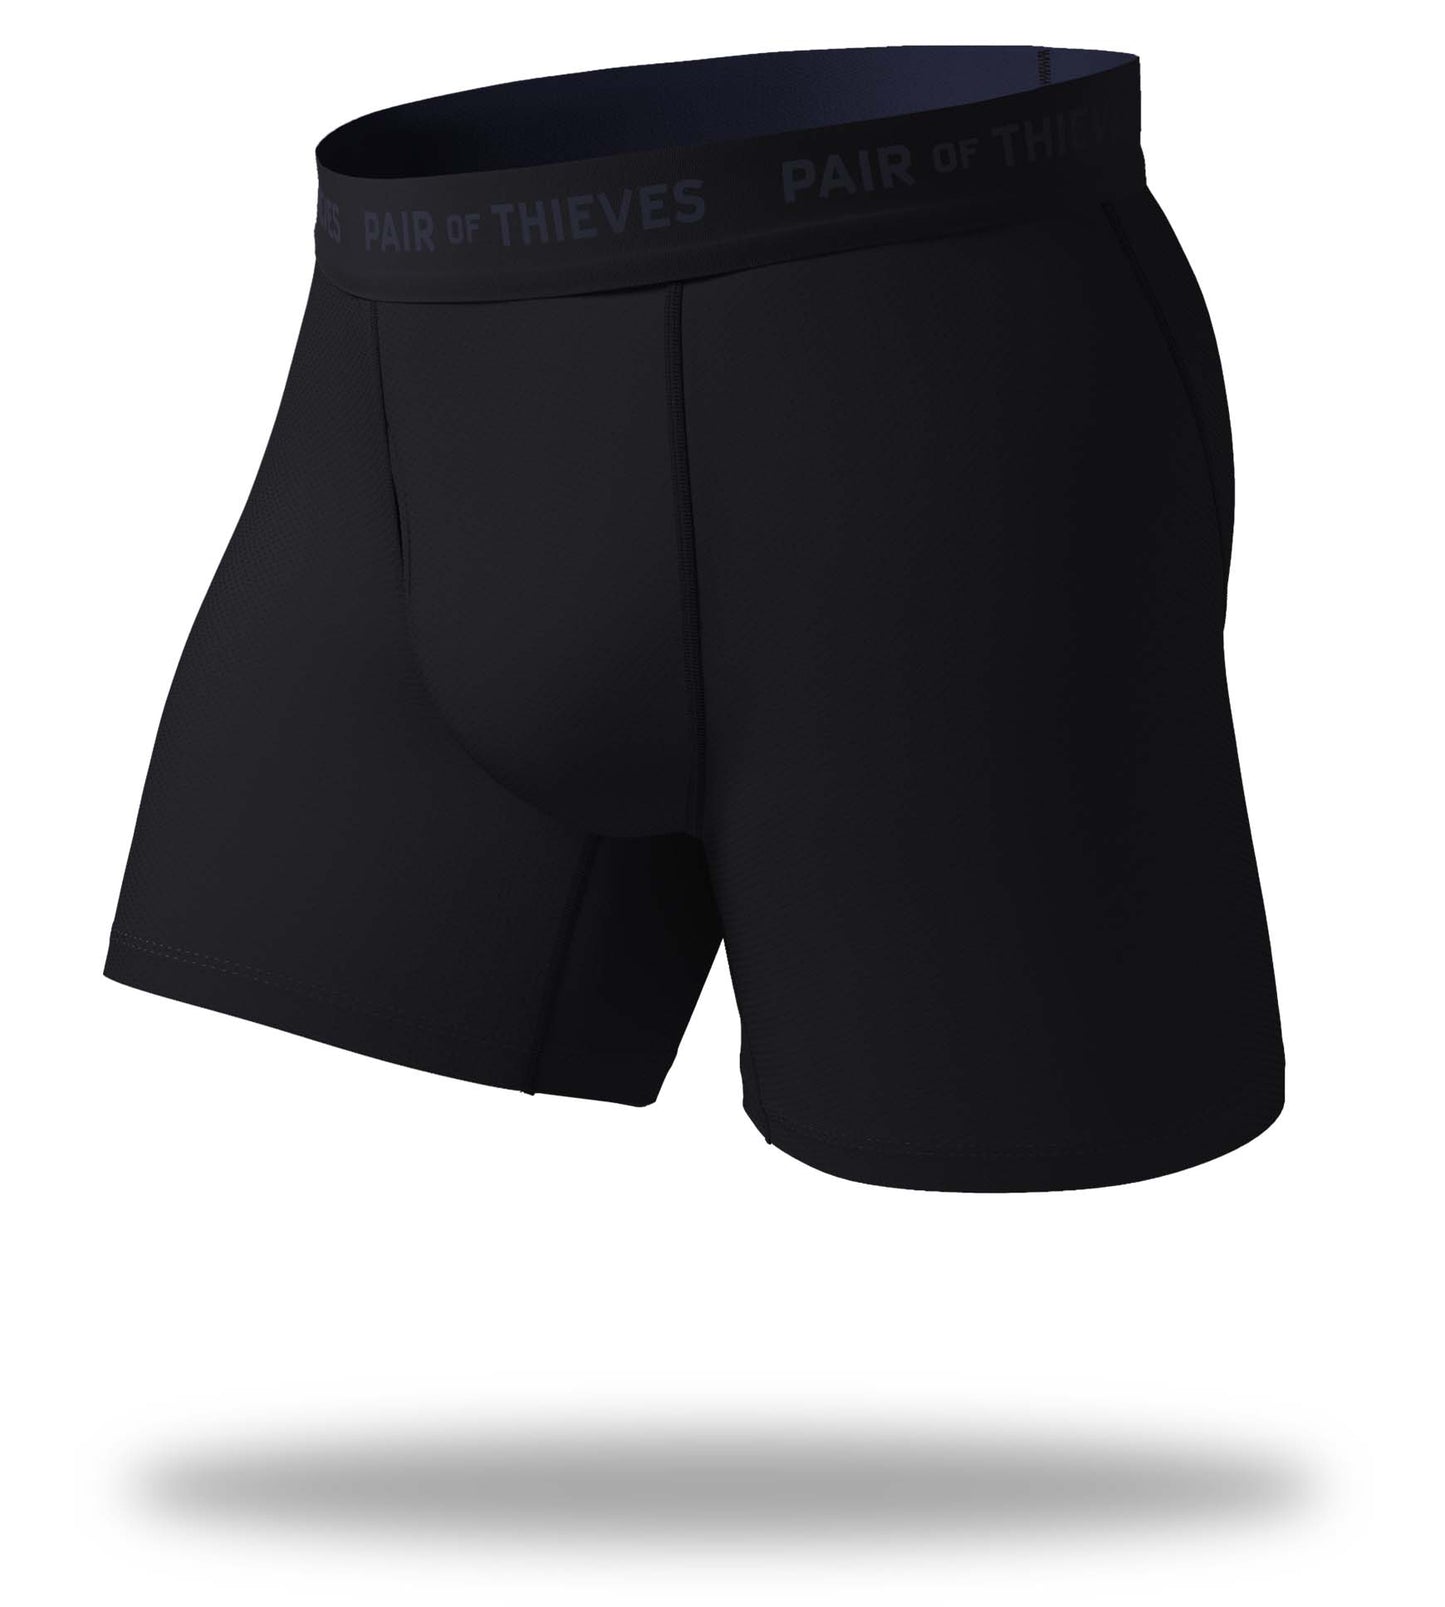 SuperFit Boxer Briefs, black with navy logo on black waistband